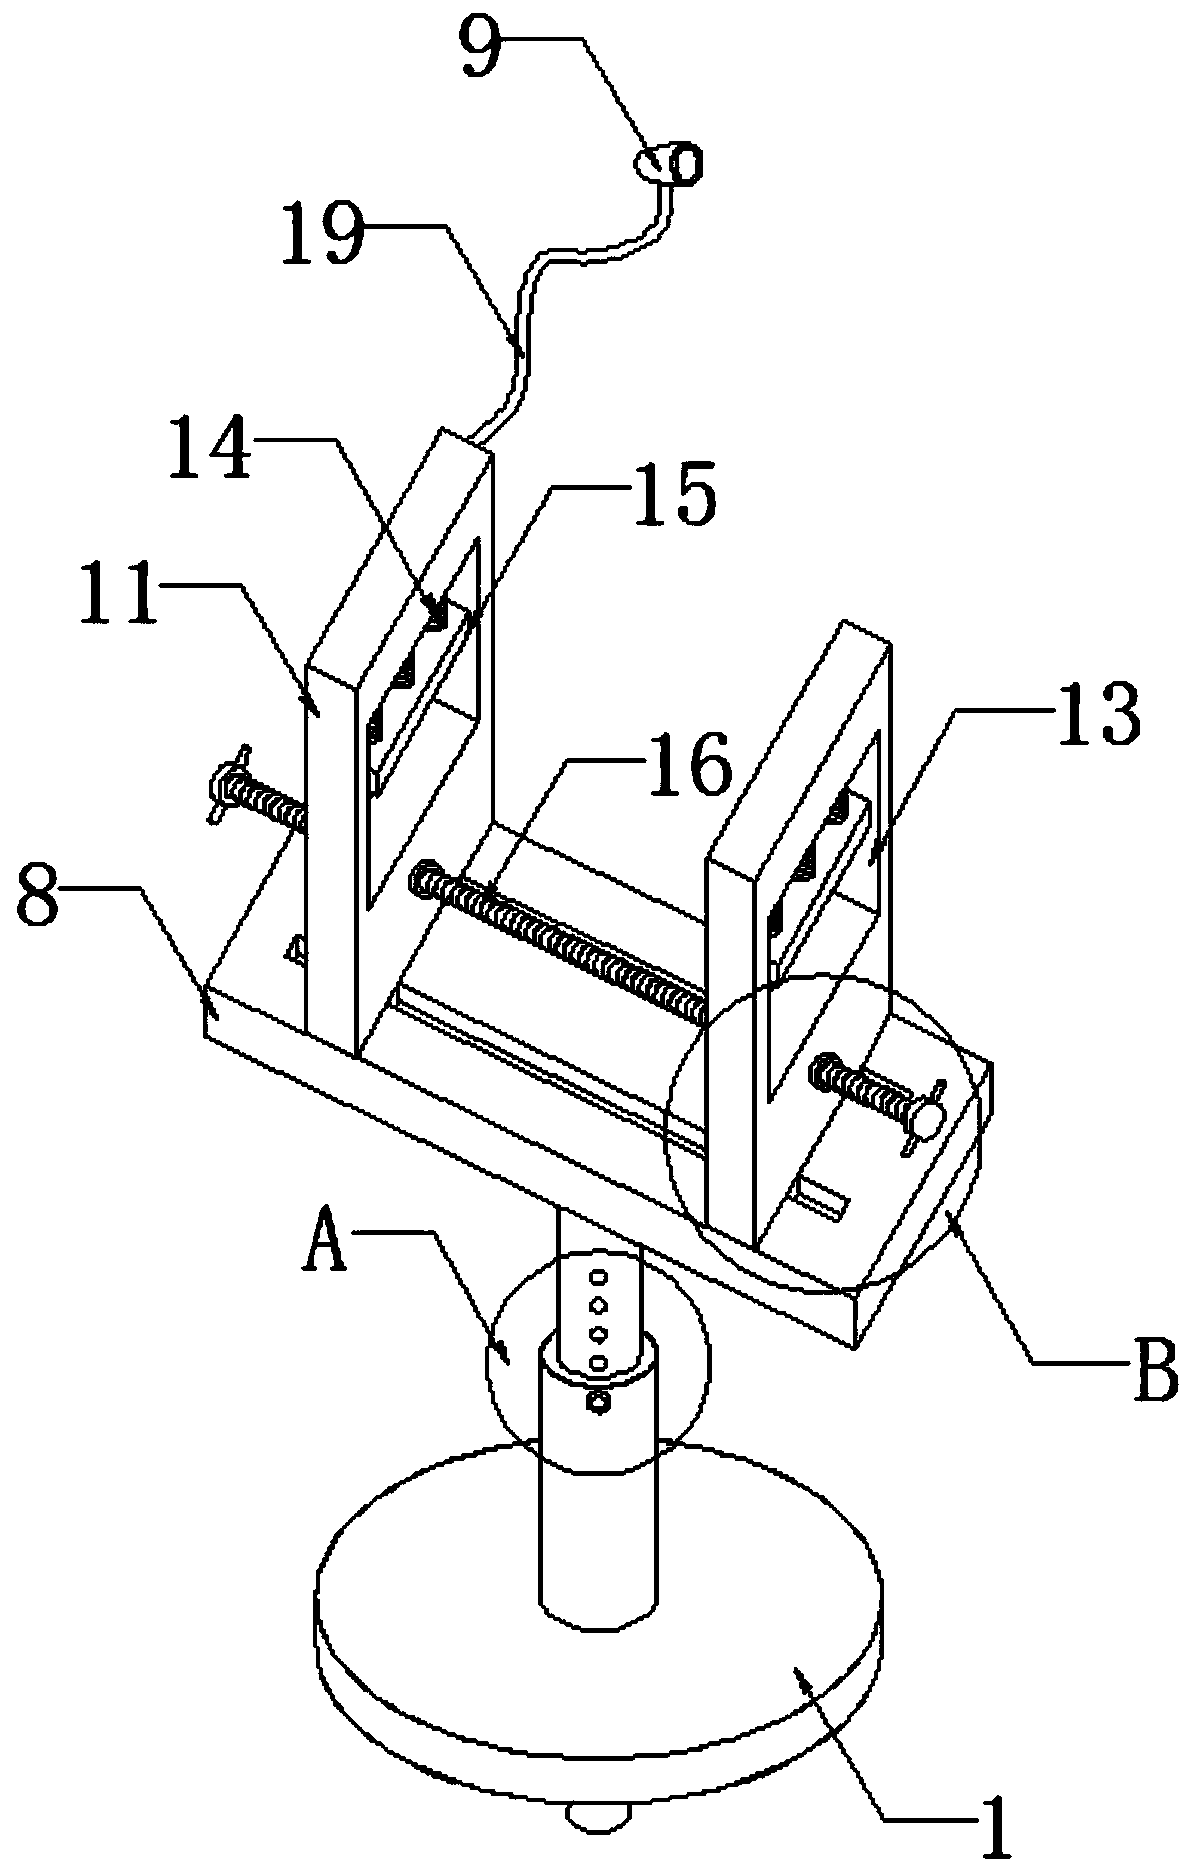 Fixed jig for repairing electronic equipment